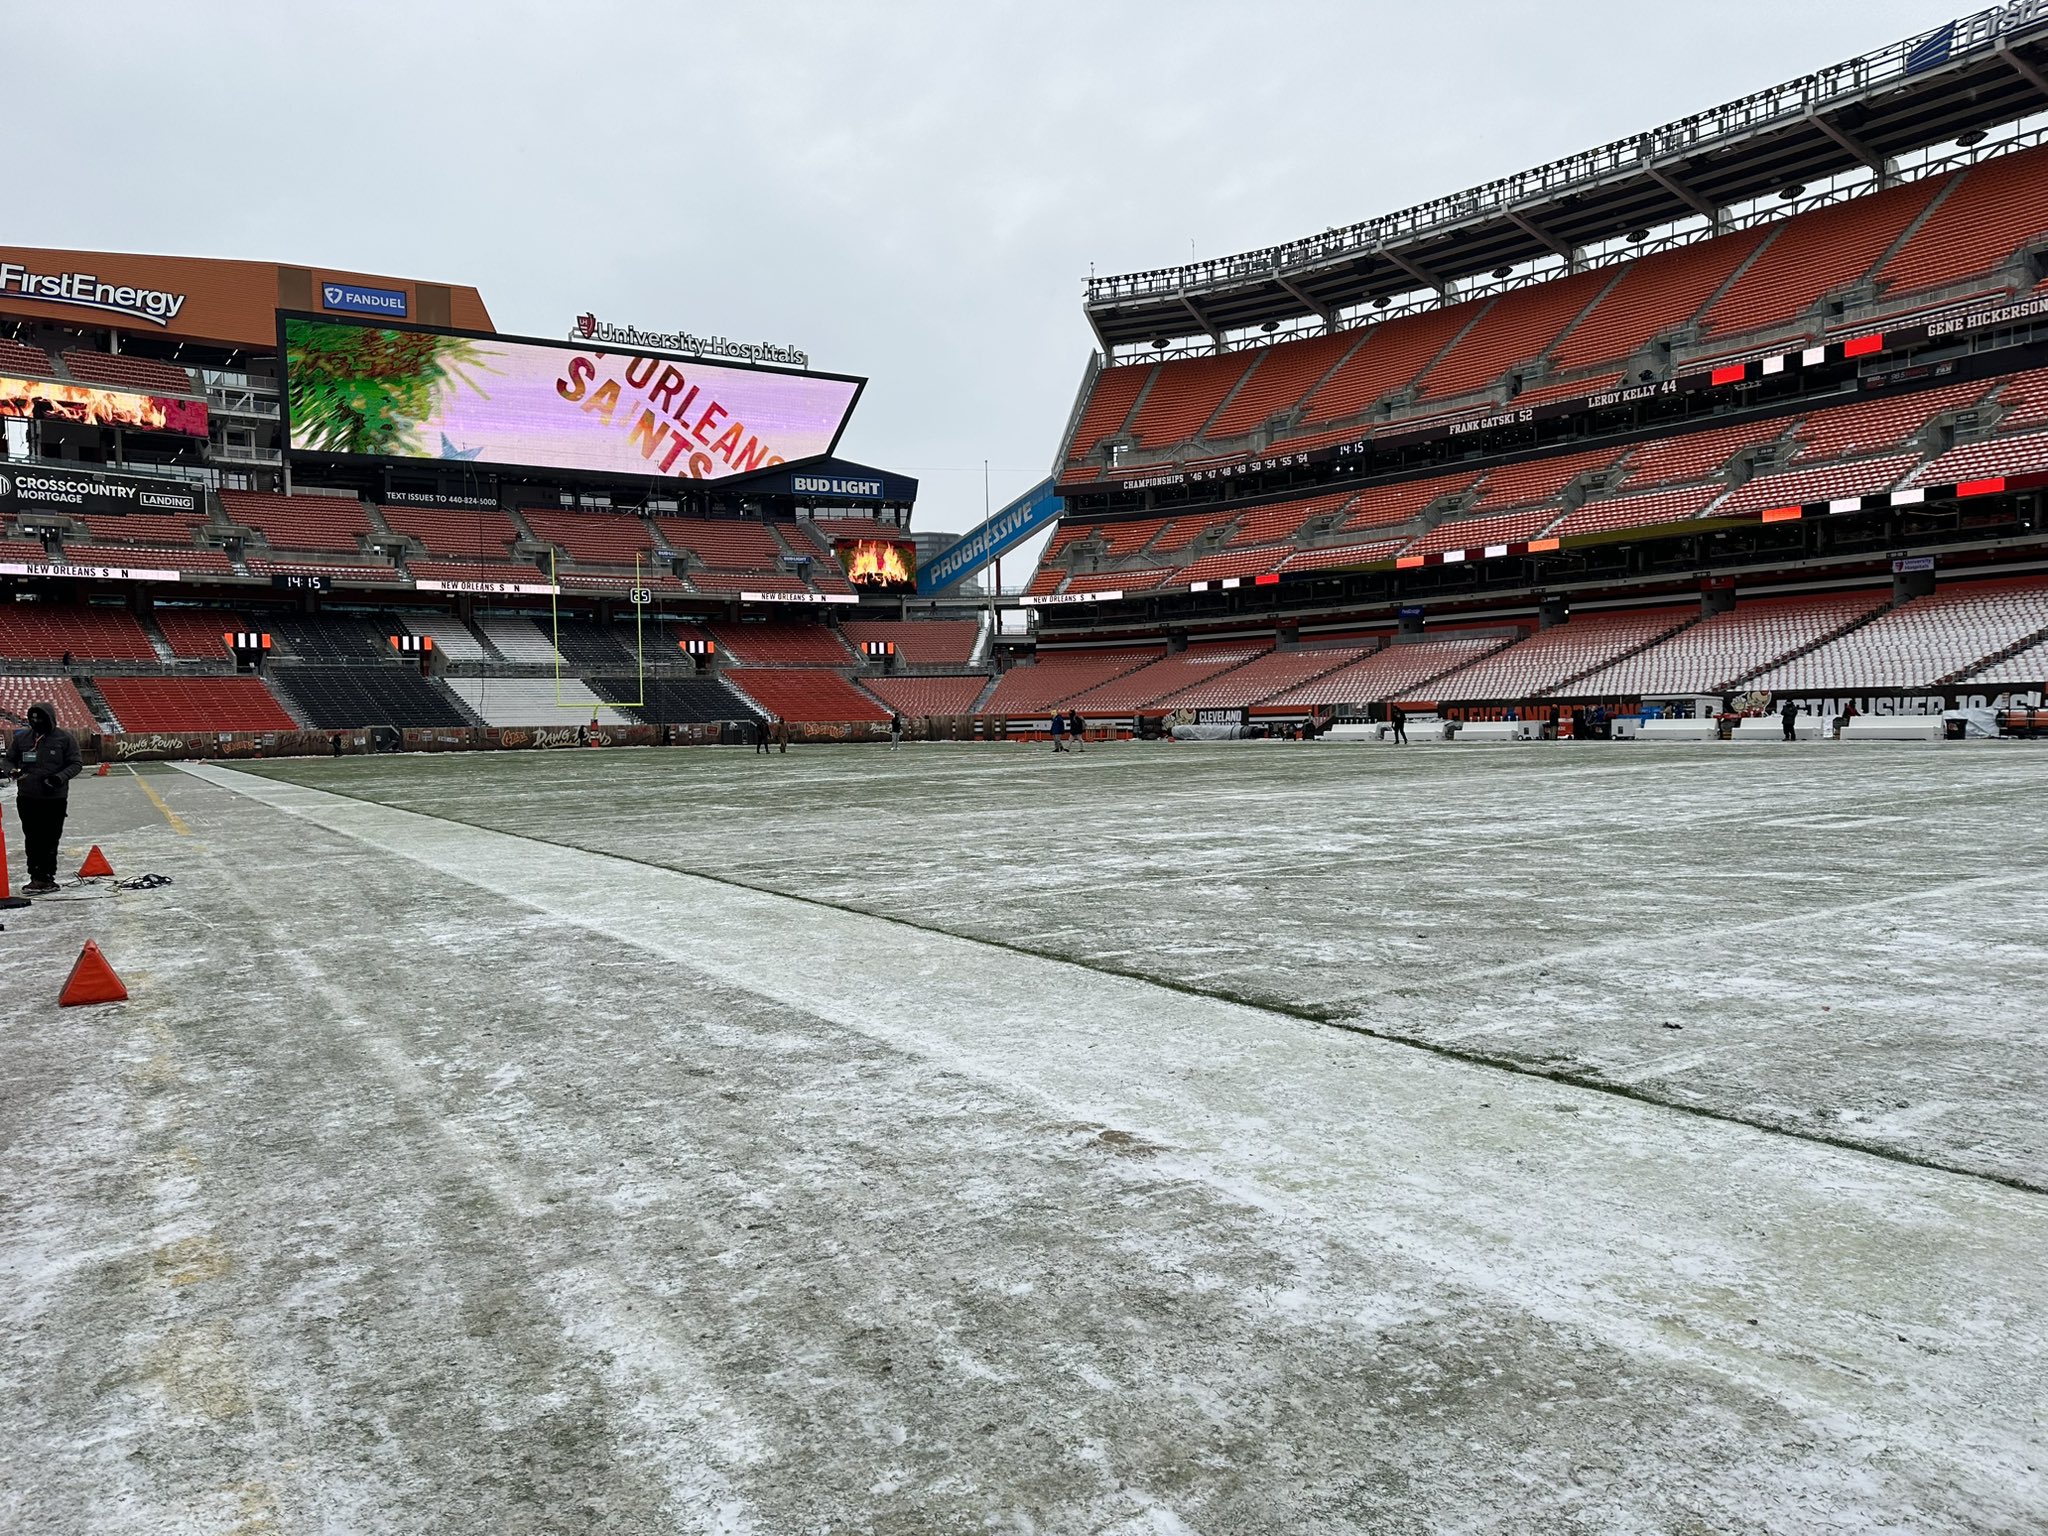 Cleveland Browns vs New Orleans Saints weather report: What is the temperature at FirstEnergy stadium?